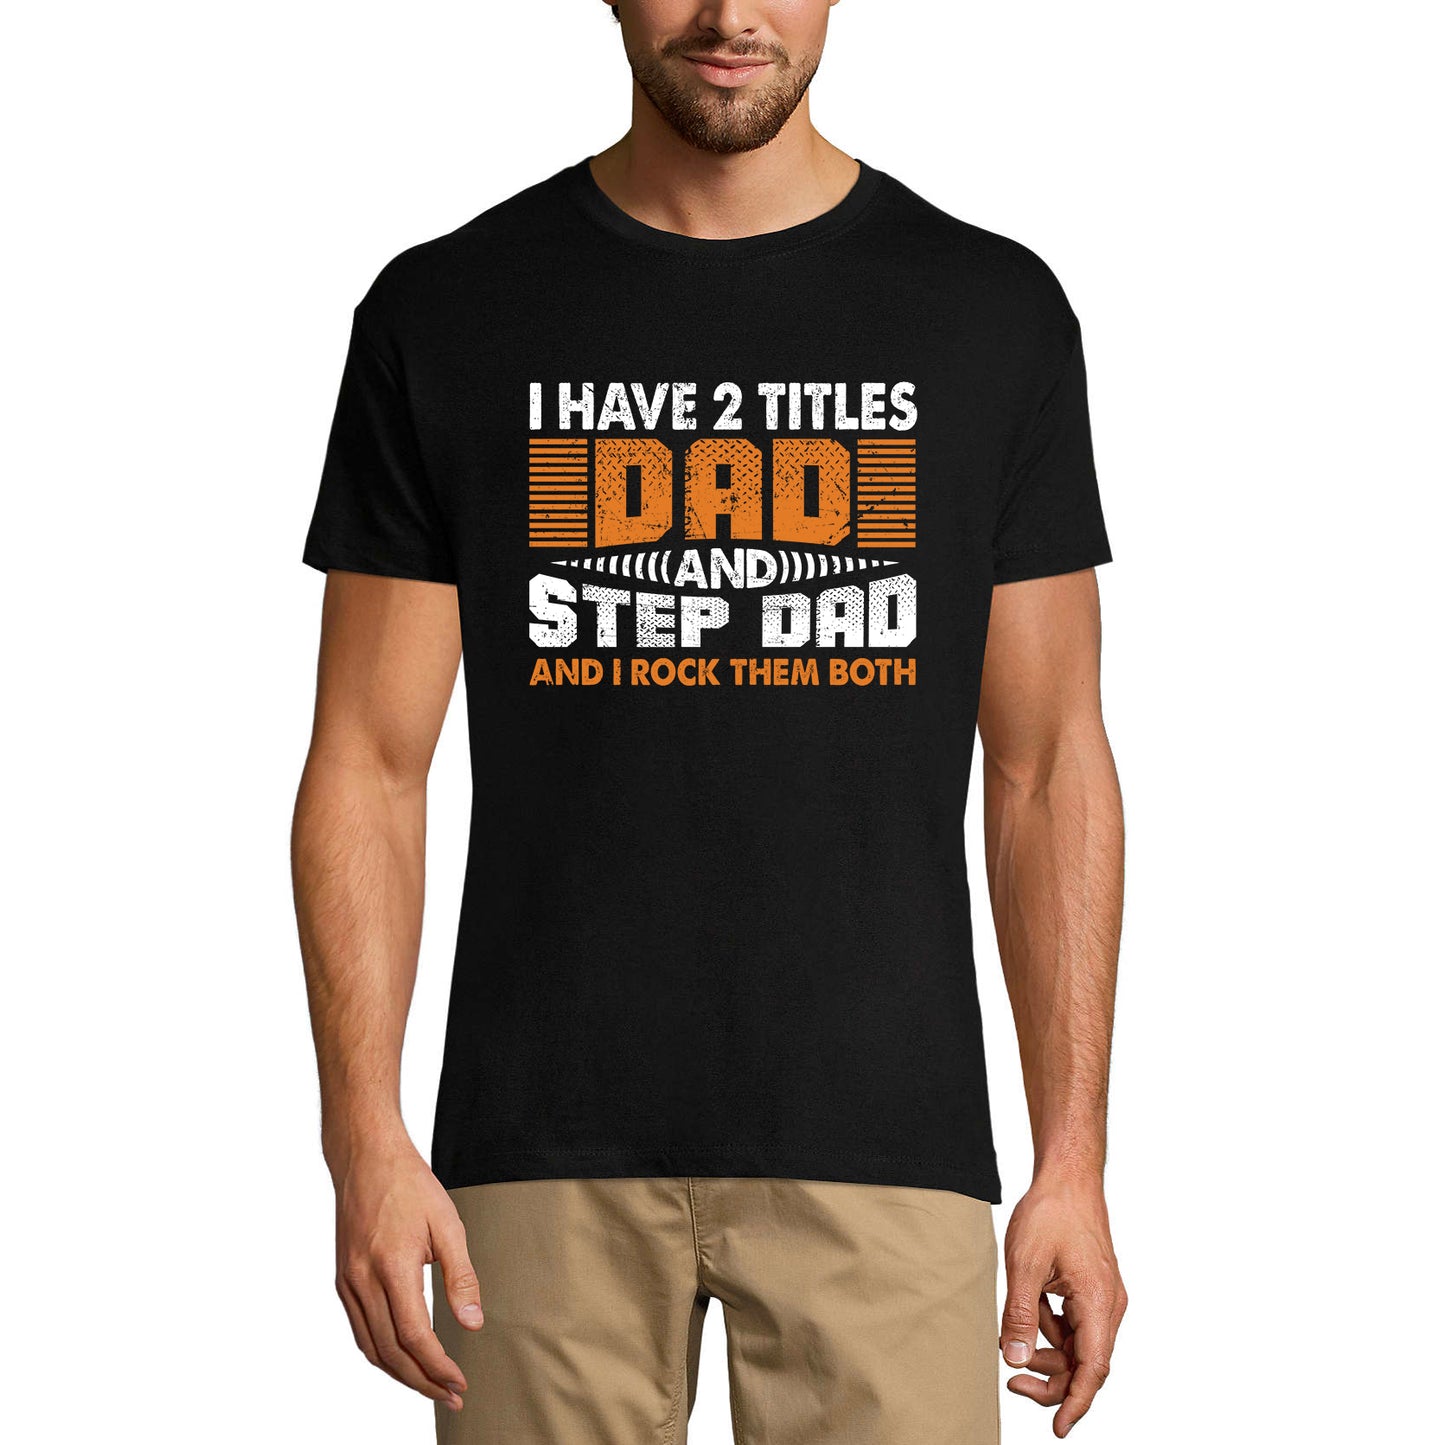 ULTRABASIC Men's Graphic T-Shirt I Have Two Titles Dad and Step Dad - I Rock Them Both